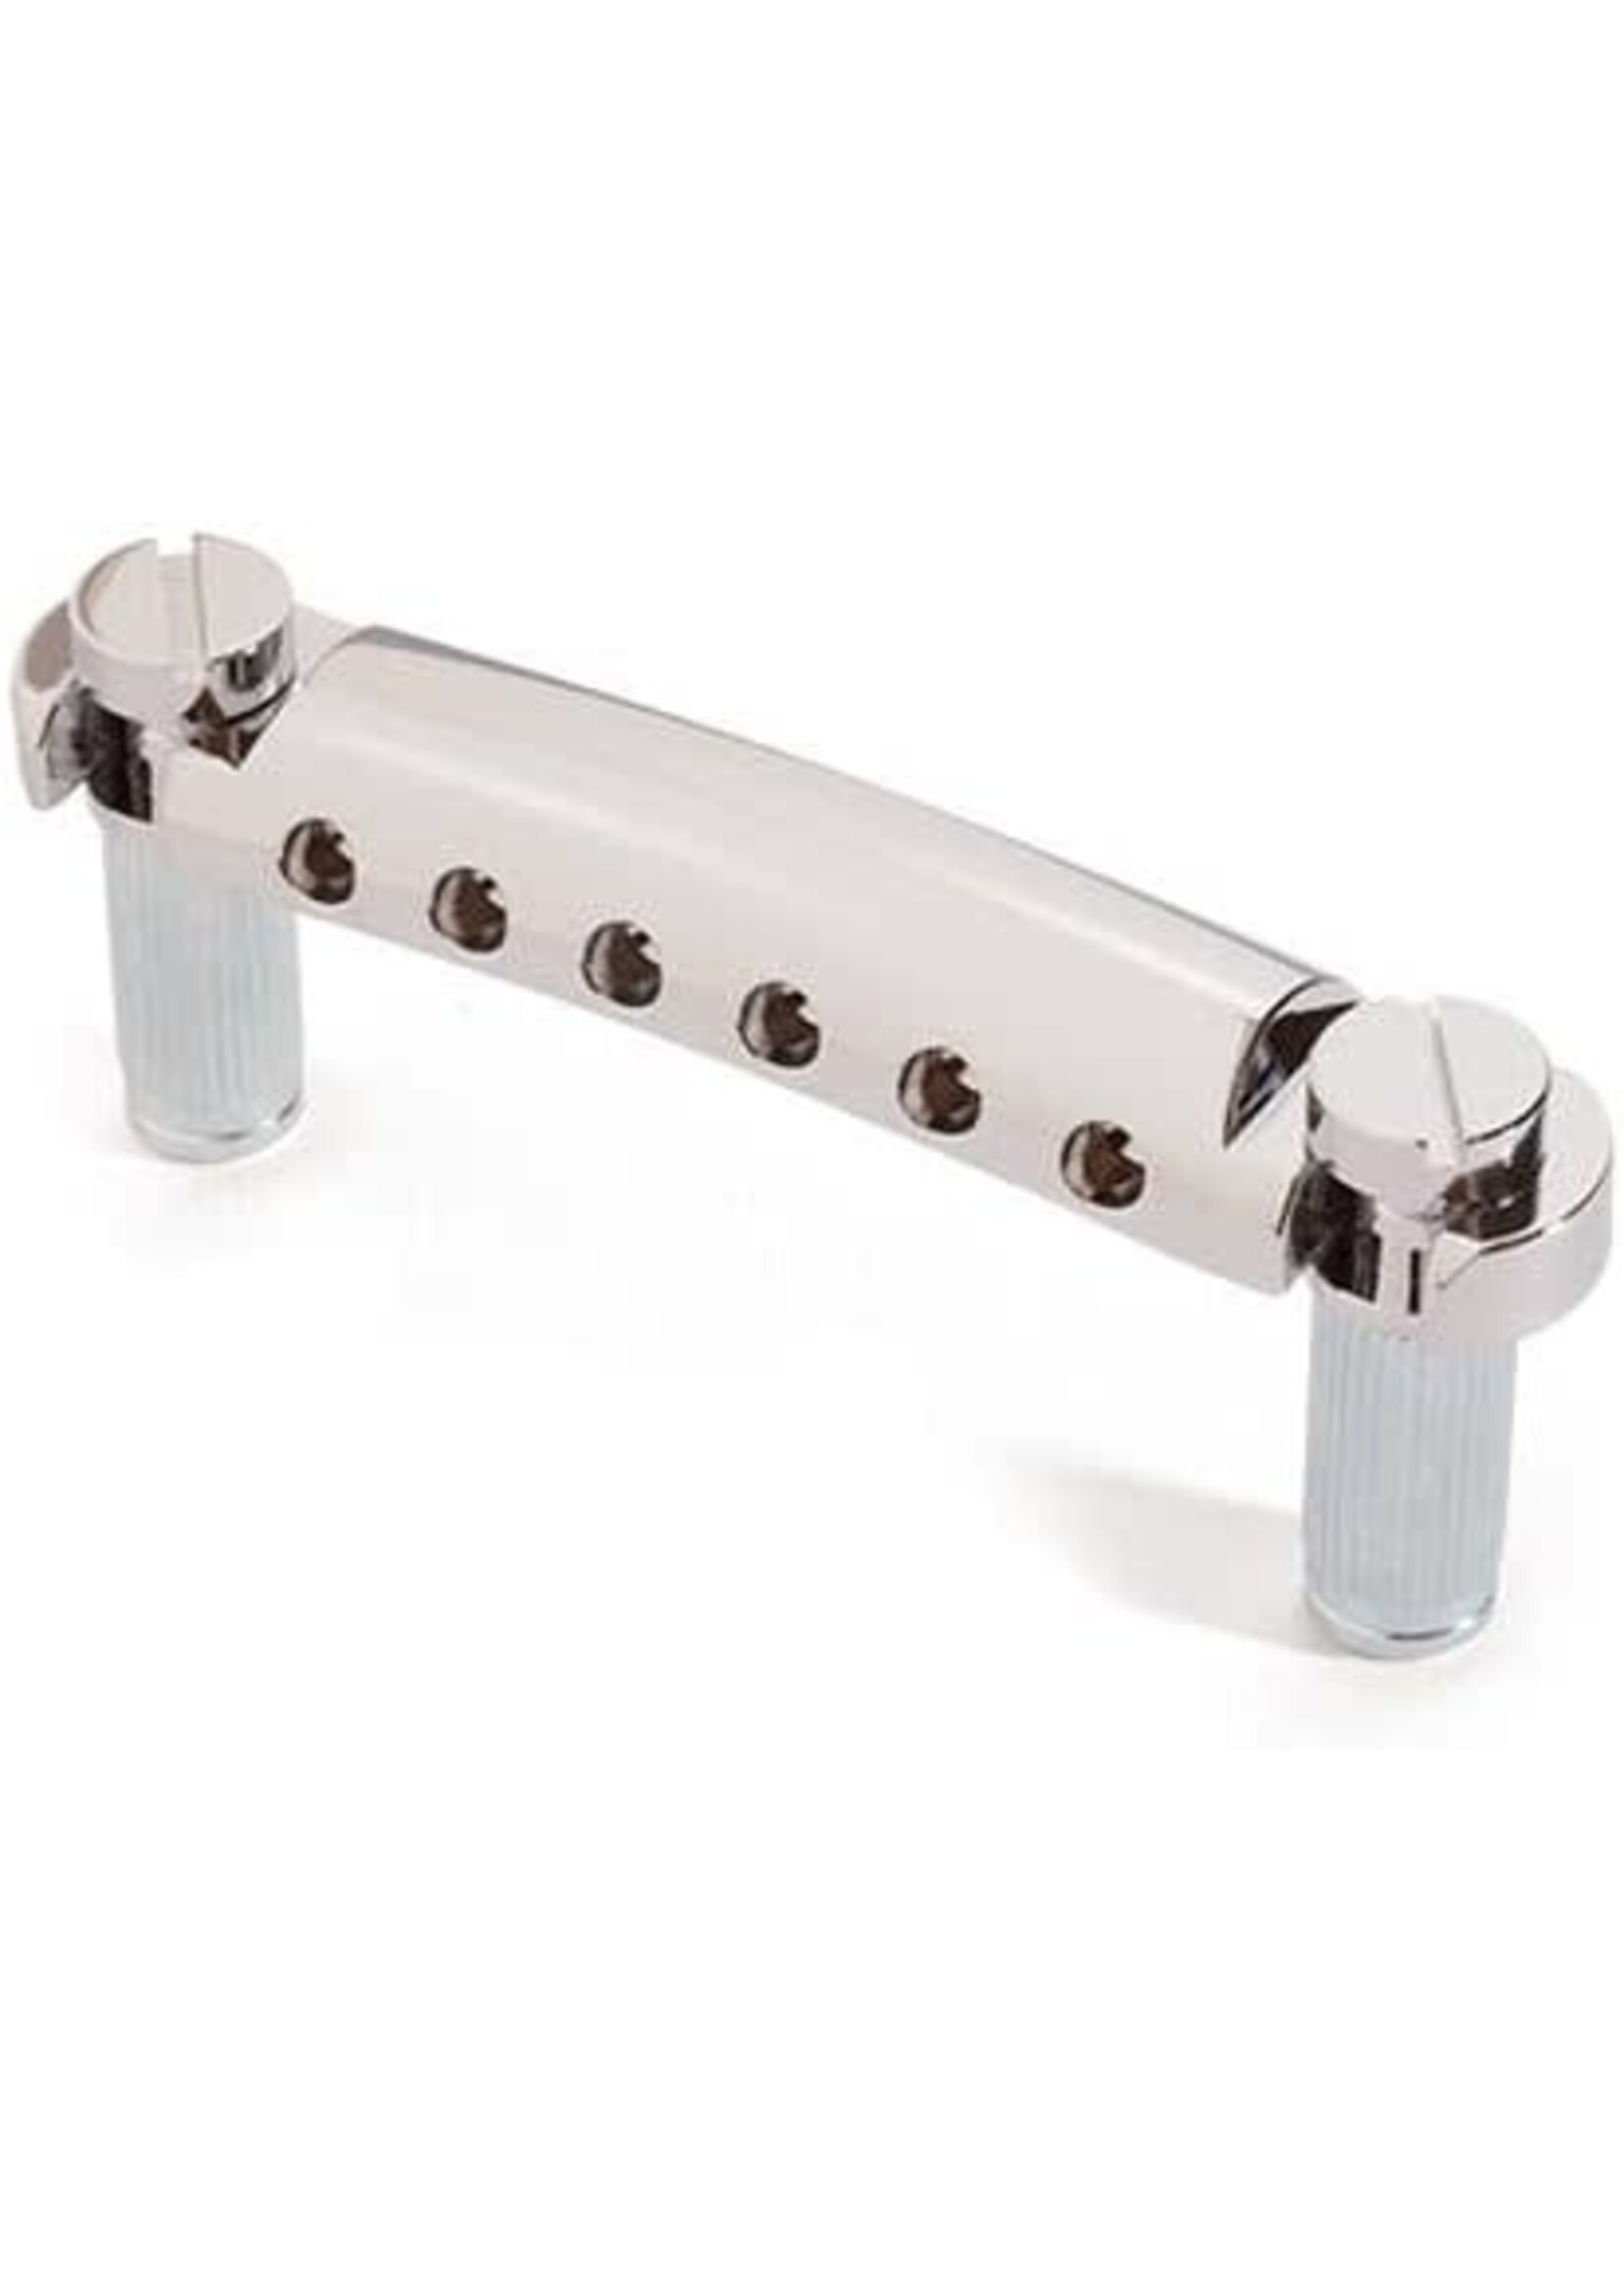 GOTOH GOTOH TAILPIECE HEIGHT ADJUSTABLE NICKEL + $5 SHIPPING